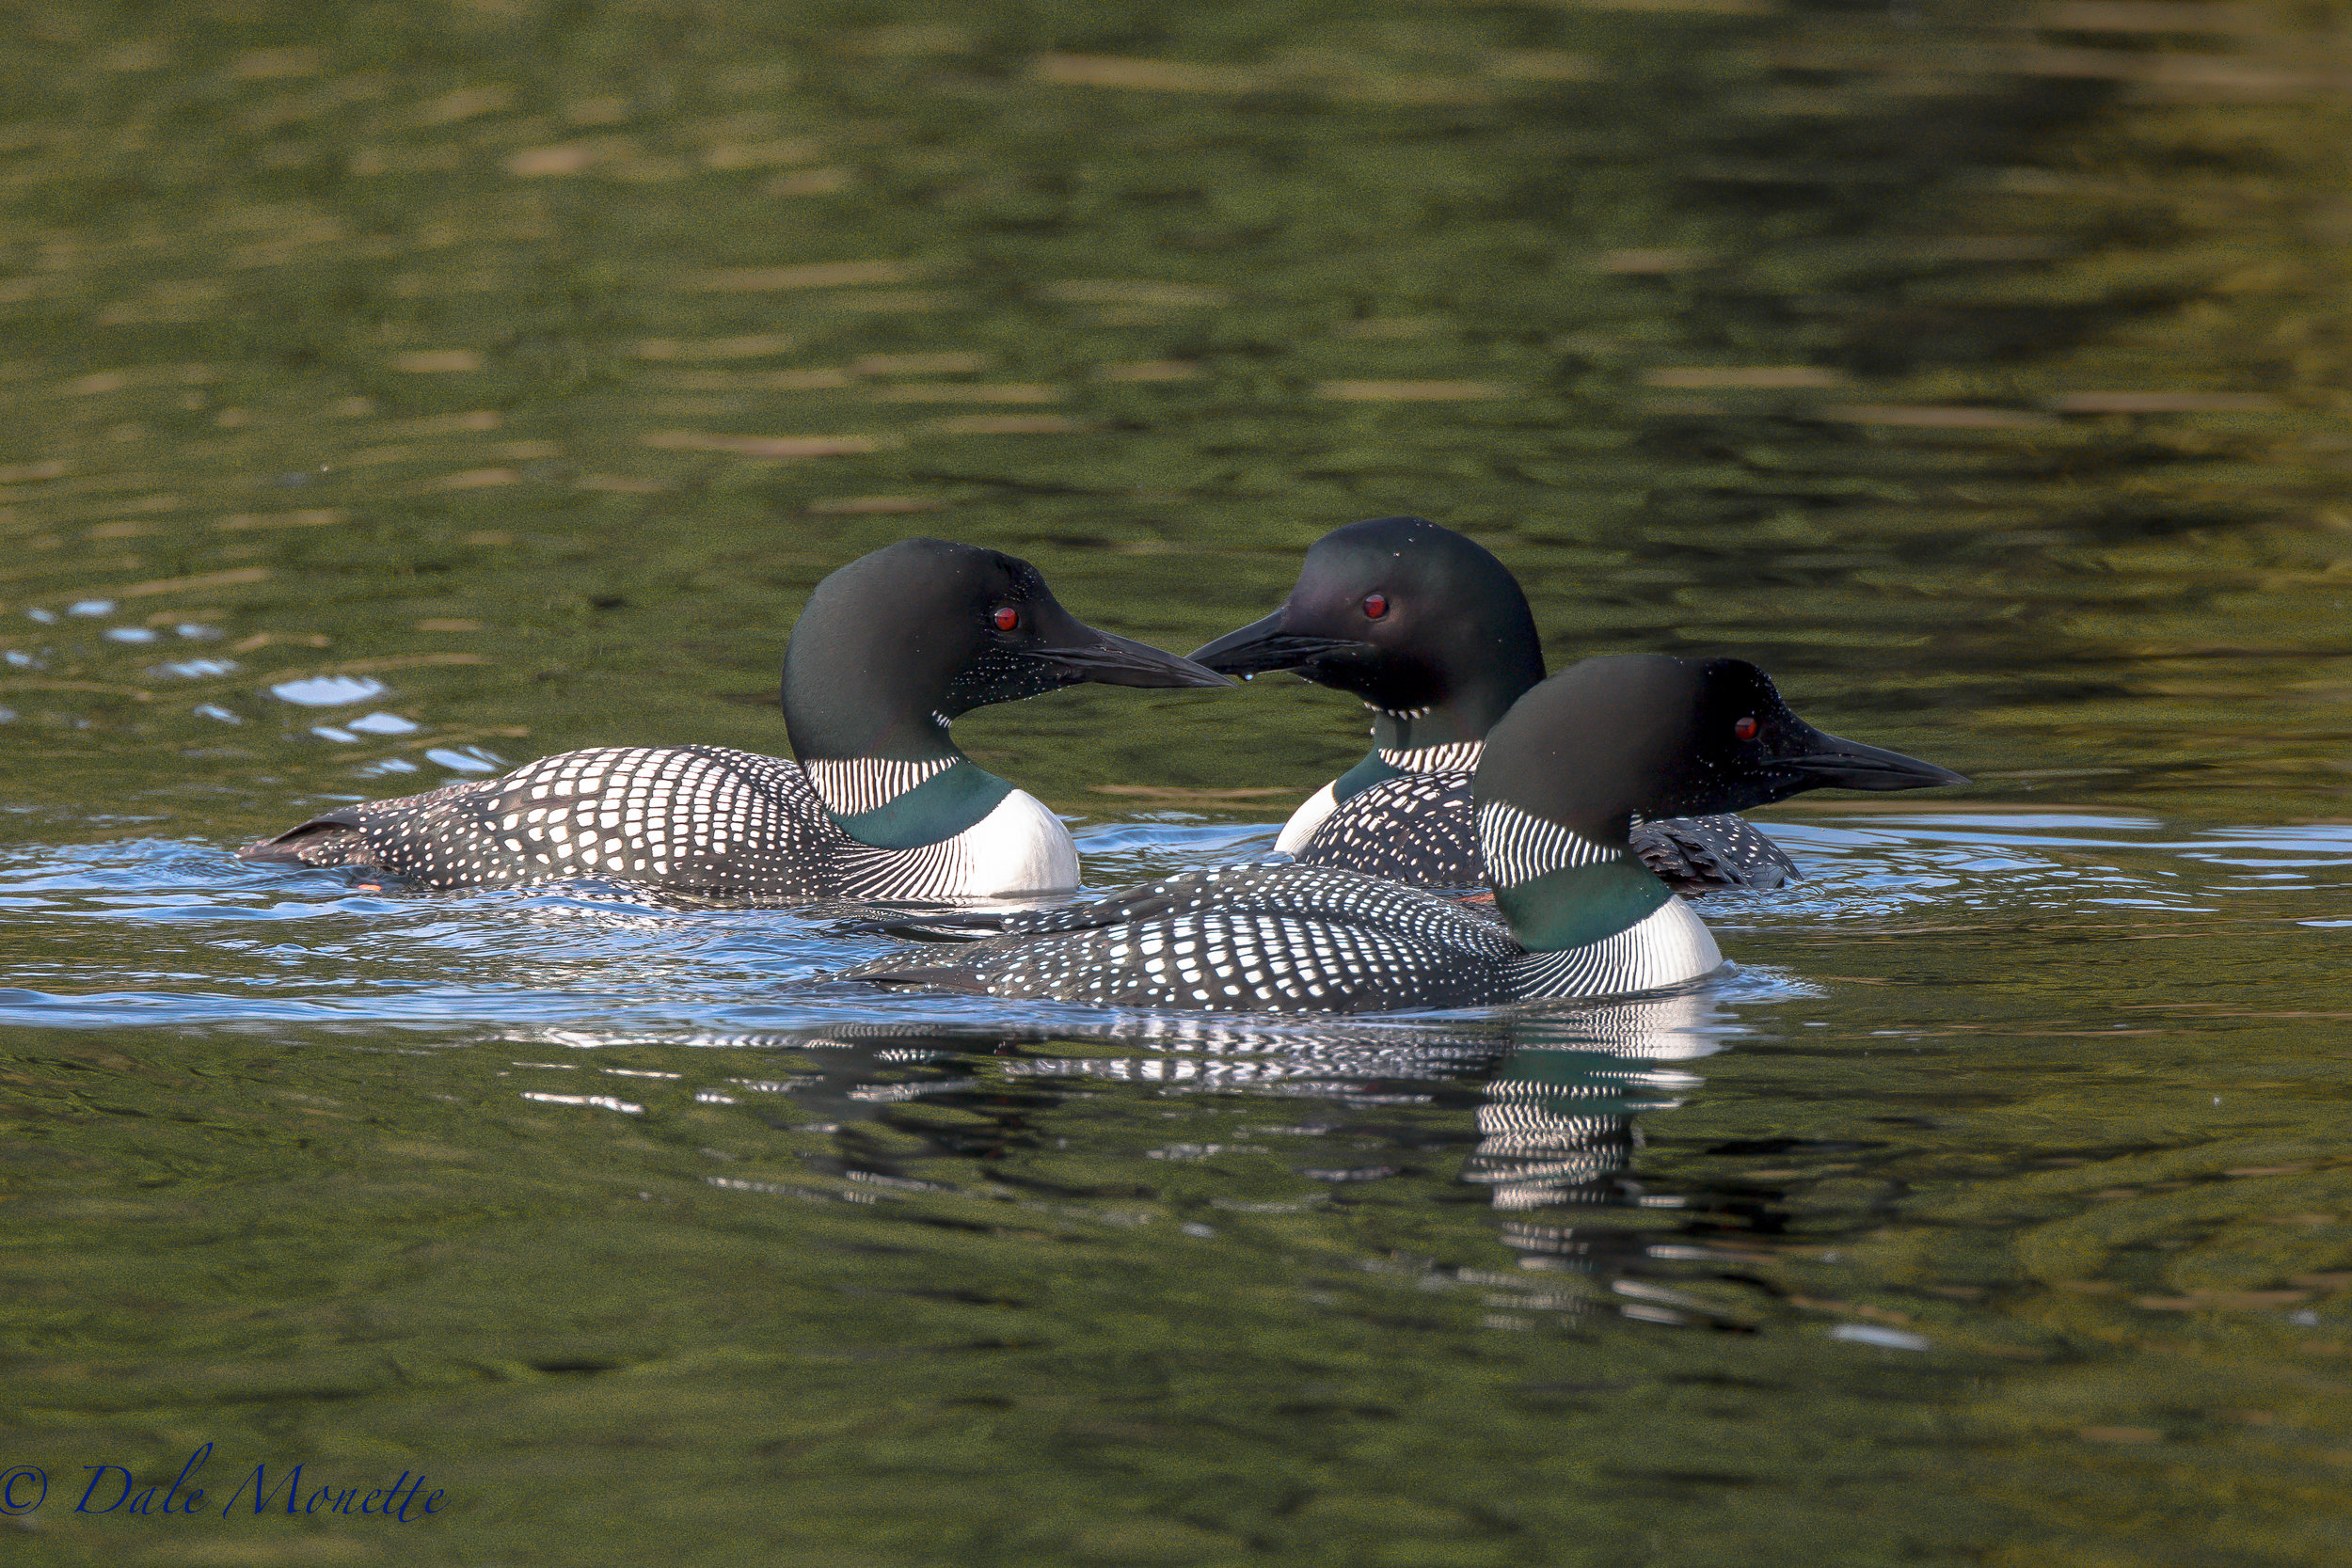   The second week of loon surveys found these three loons just hanging out and fishing together on a warm, calm, late spring afternoon.&nbsp; I love these birds! &nbsp;  